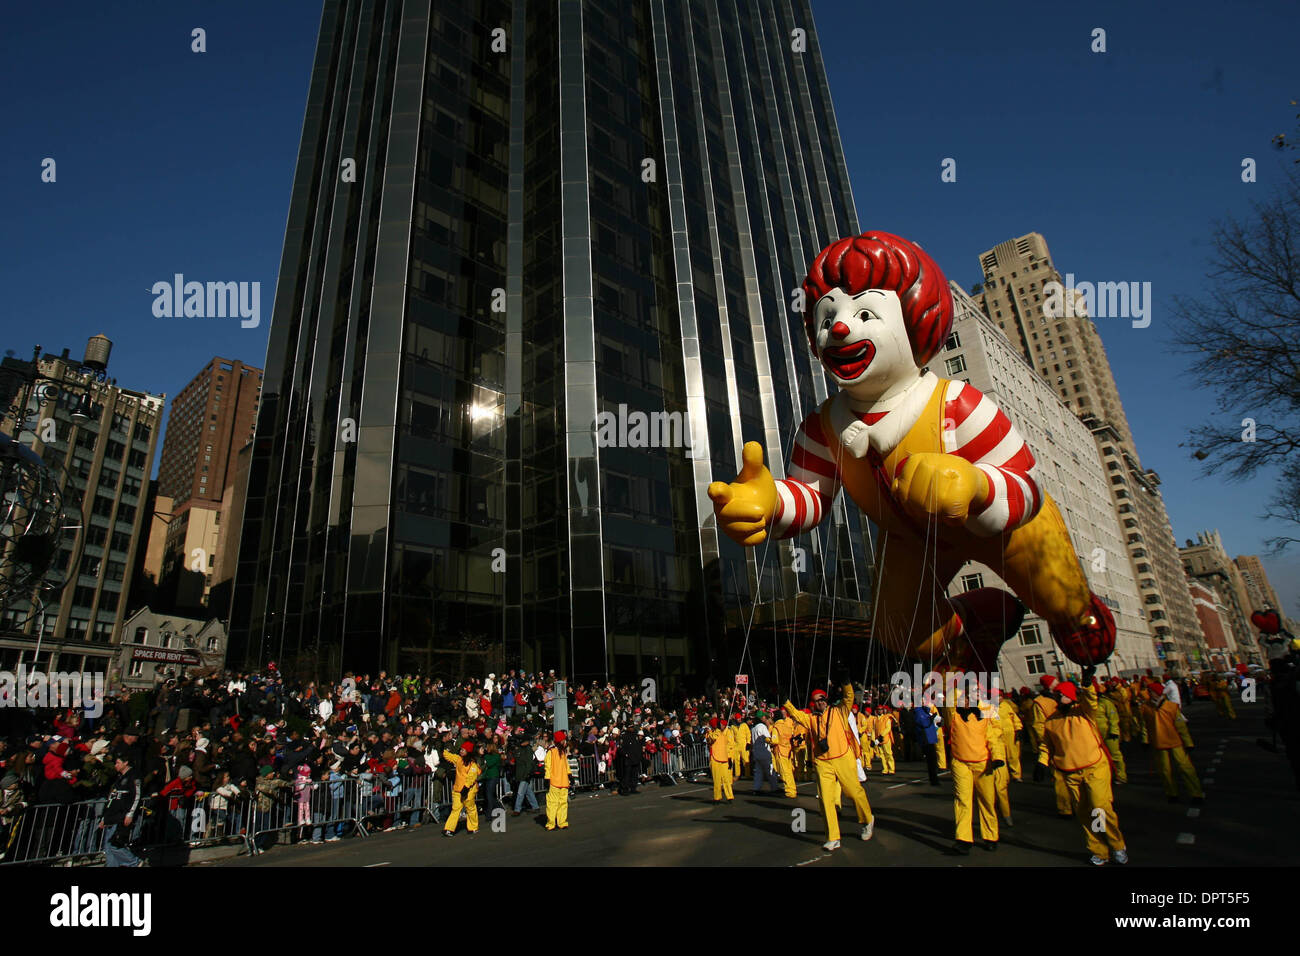 Nov 27, 2008 - Manhattan, New York, USA - Fans pack the streets to watch balloons, performers and entertainers parade through the streets of New York City for the 82nd Annual Macy's Thanksgiving Day Parade. PICTURED: the Ronald McDonald balloon. (Credit Image: © Mehmet Demirci/ZUMA Press) Stock Photo